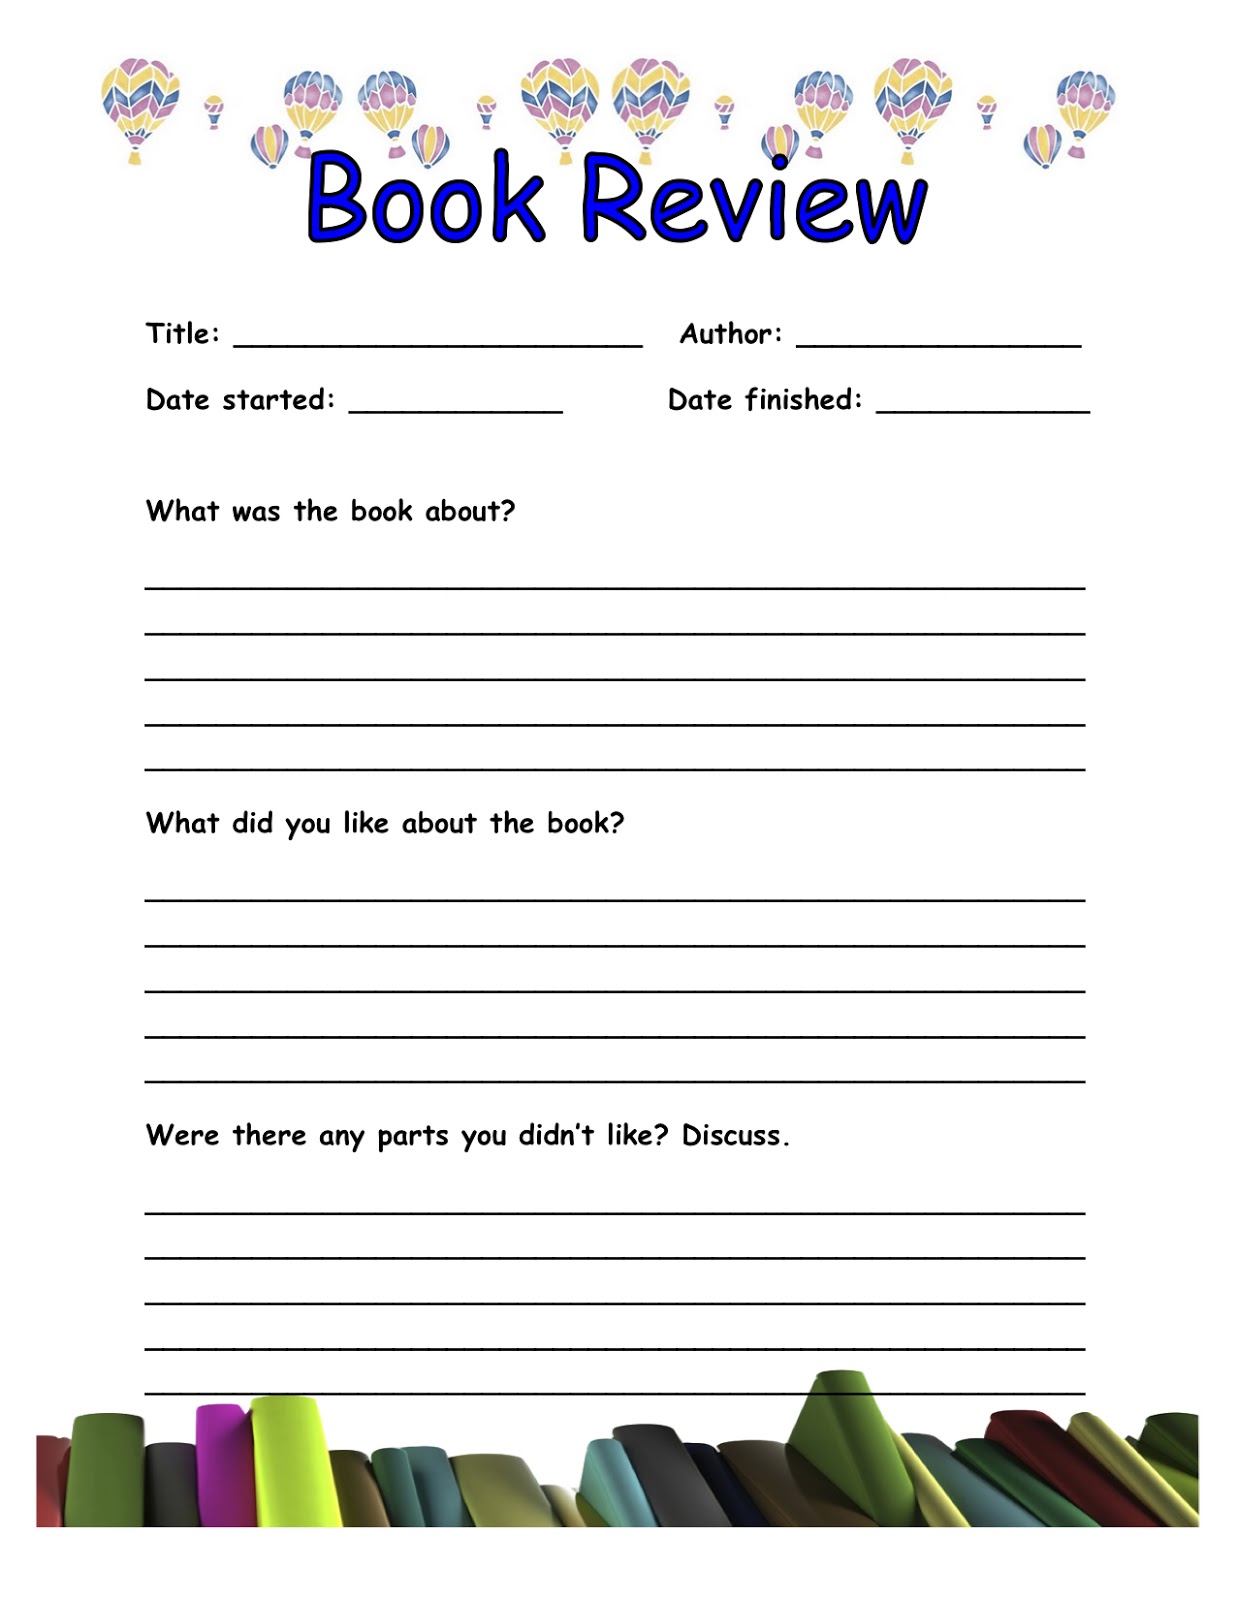 Book Review Writing Examples